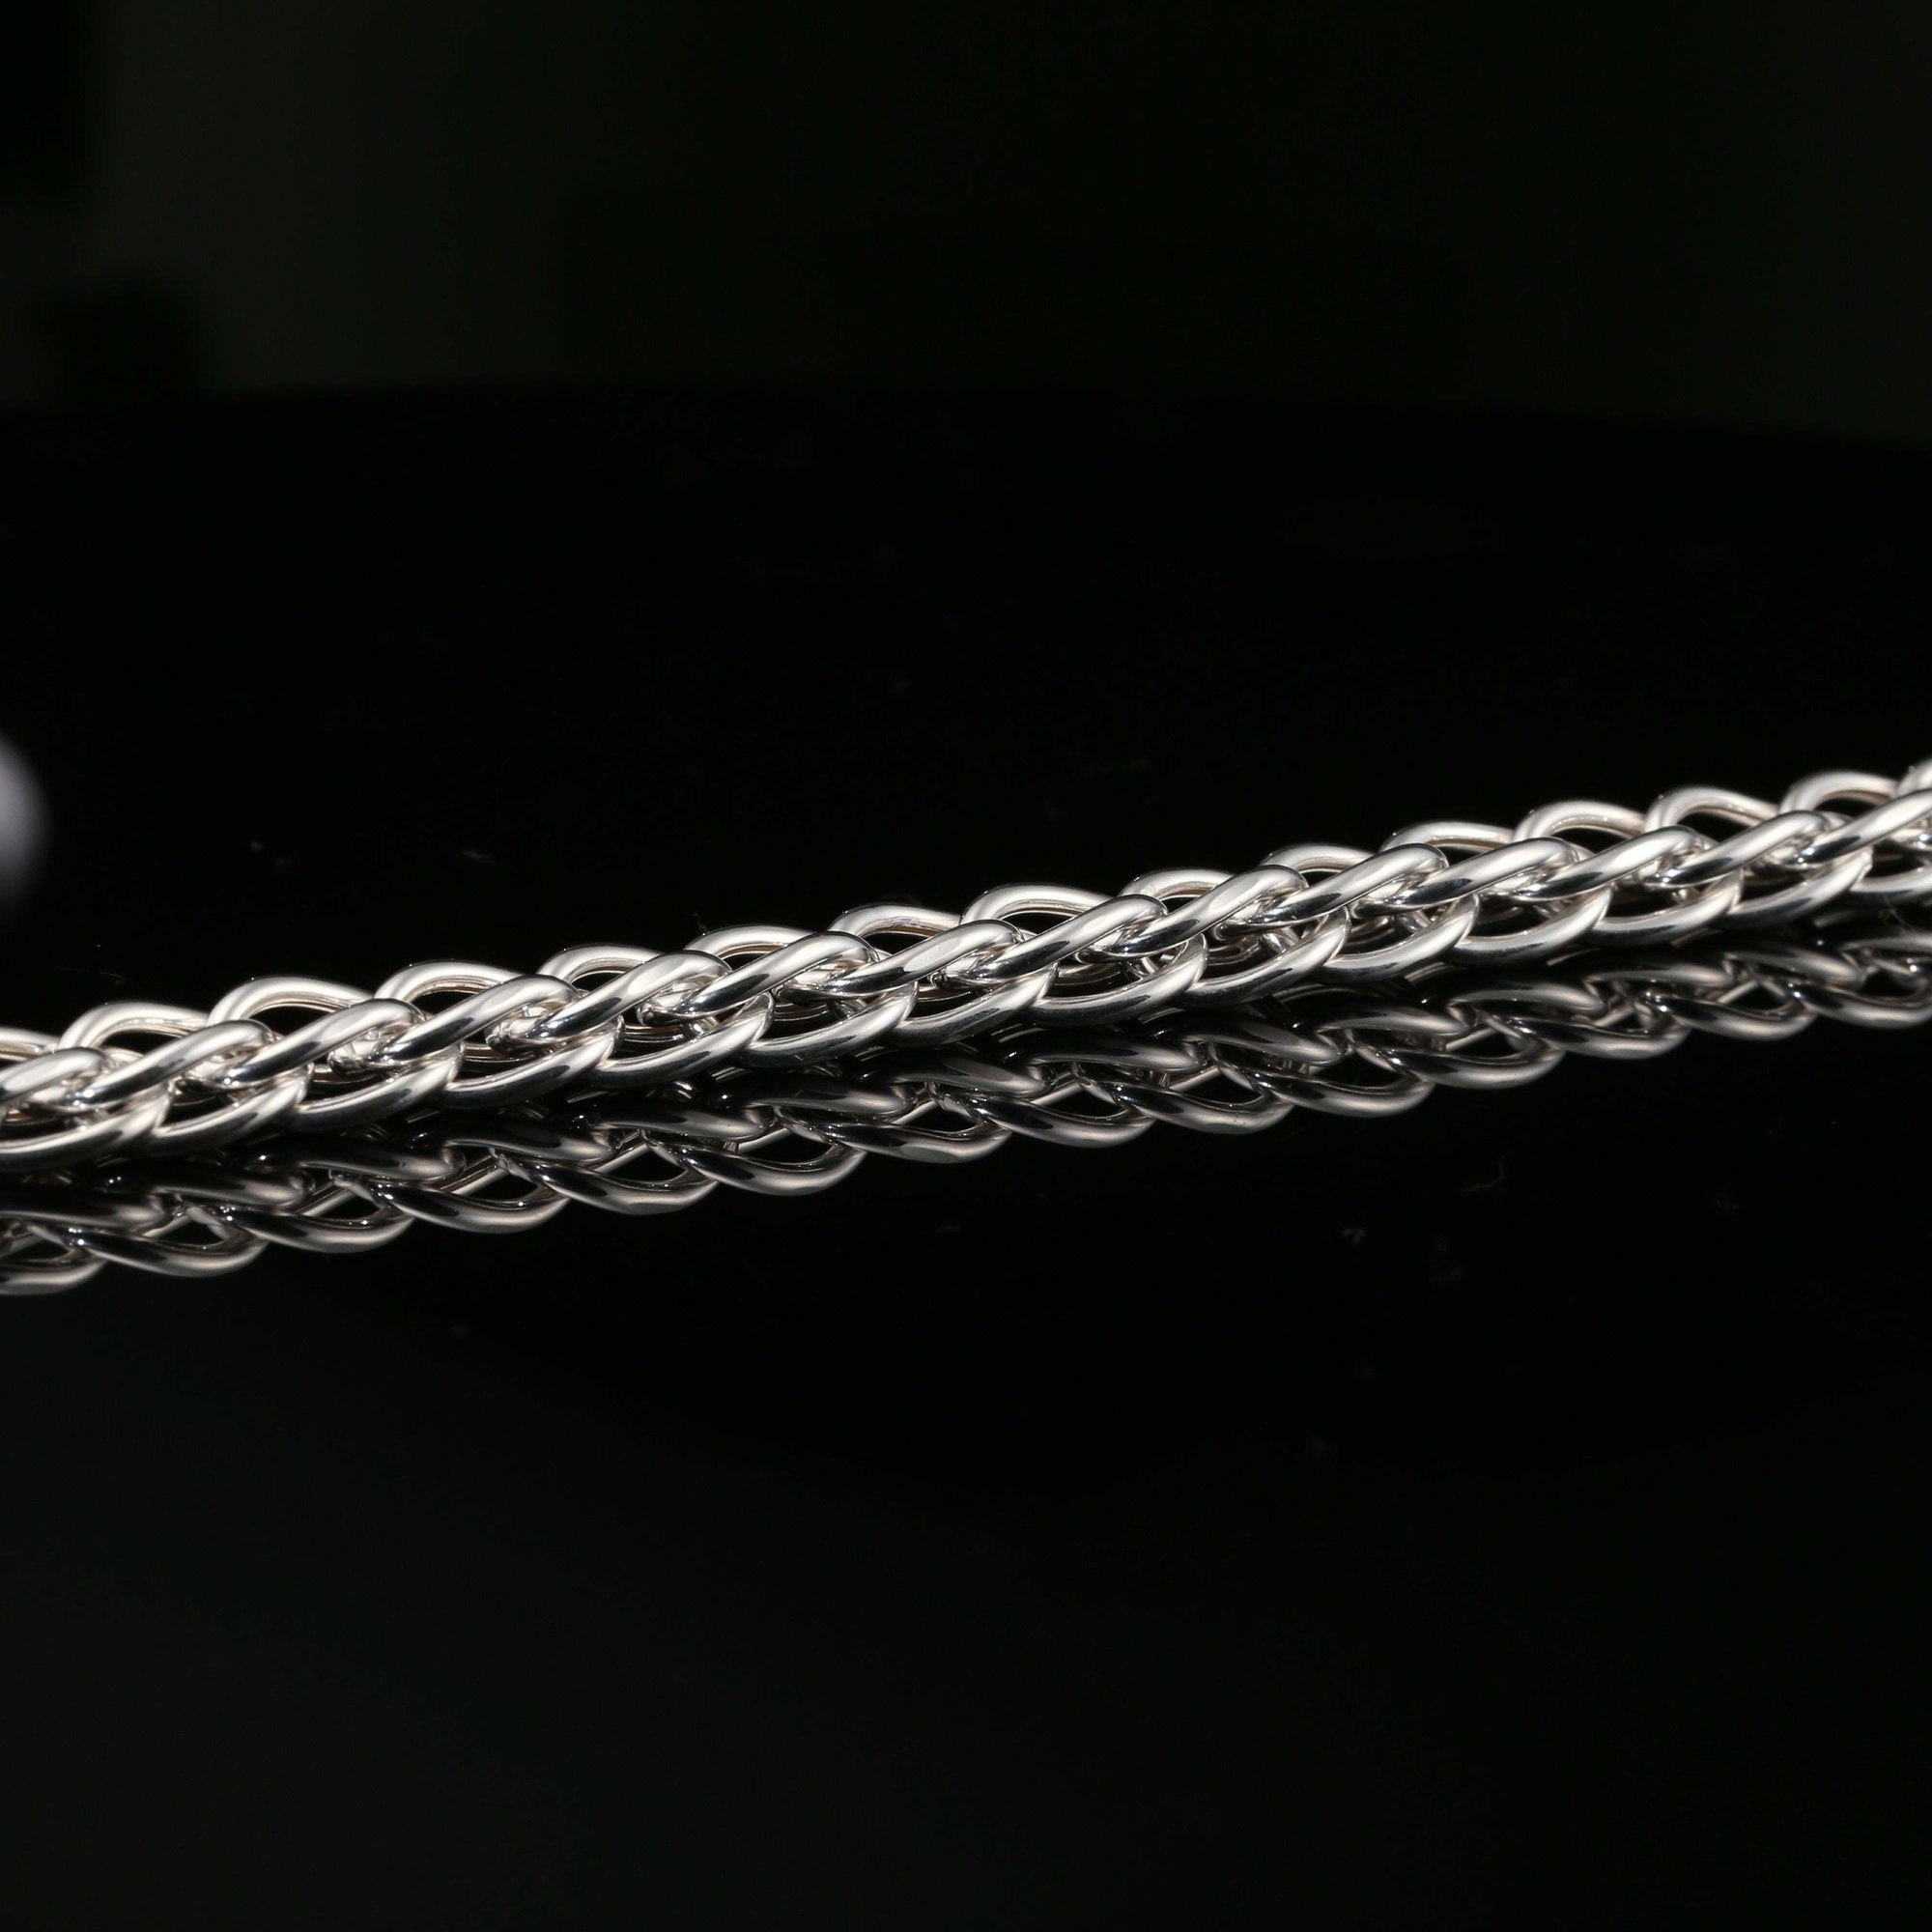 Byzantine Chain Bracelet with Hook Clasp in , 8&amp;quot;, Unisex in Sterling Silver